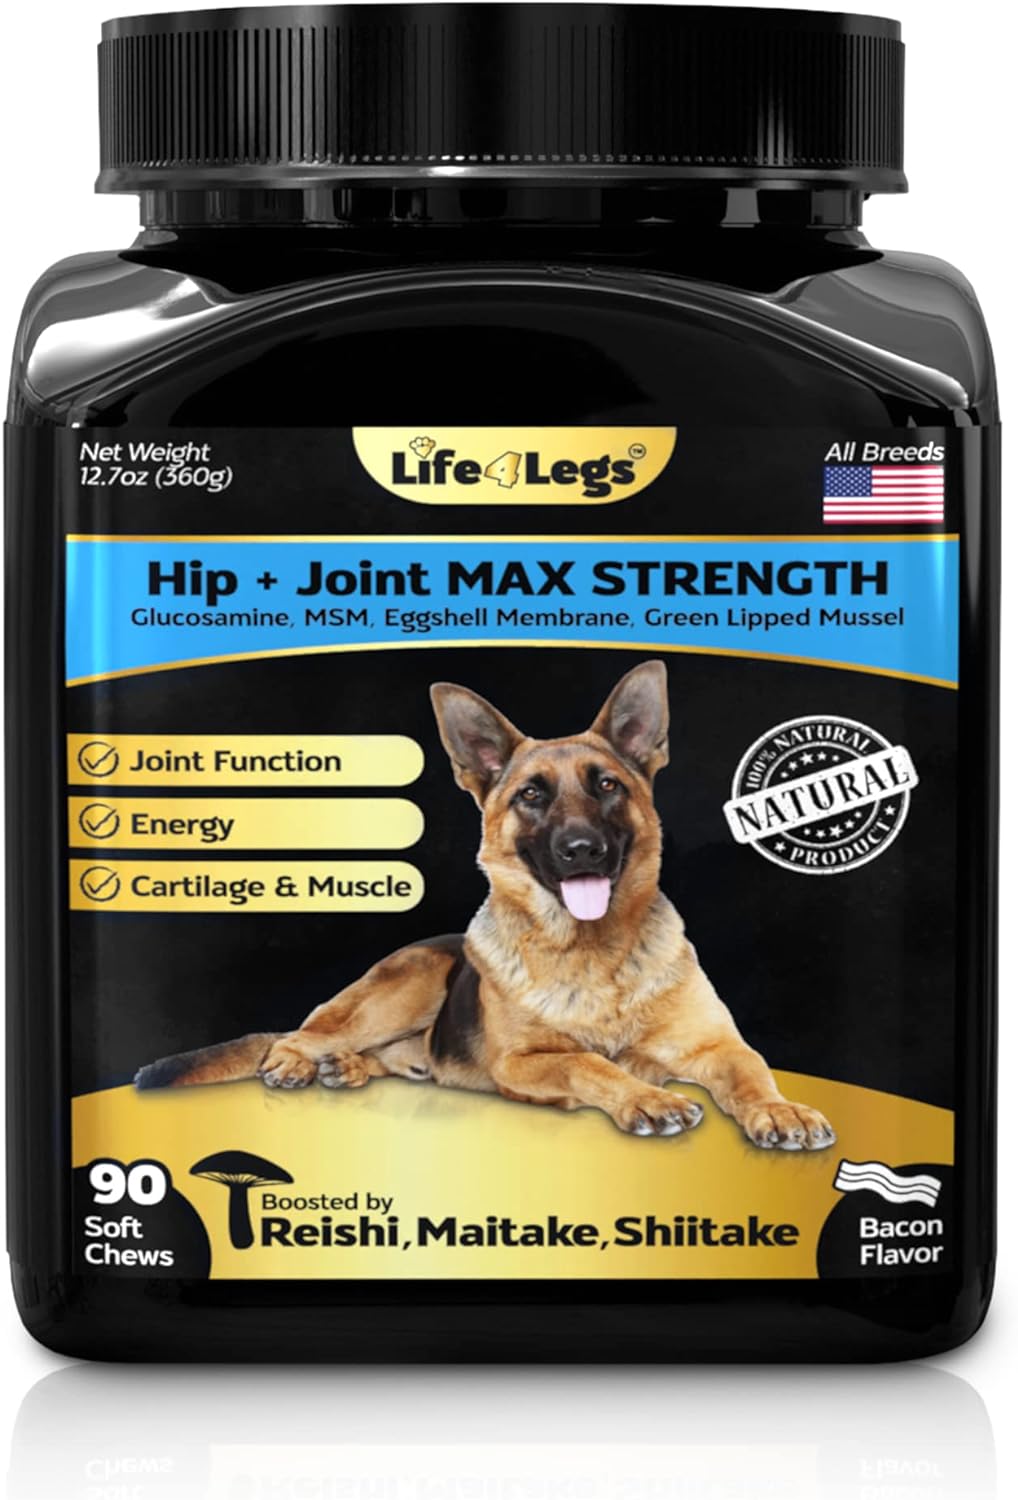 Life4Legs - Soft Chews Hip and Joint Supplement for Dogs - Dog Joint Pain Relief Treats - Glucosamine, Chondroitin, Turm